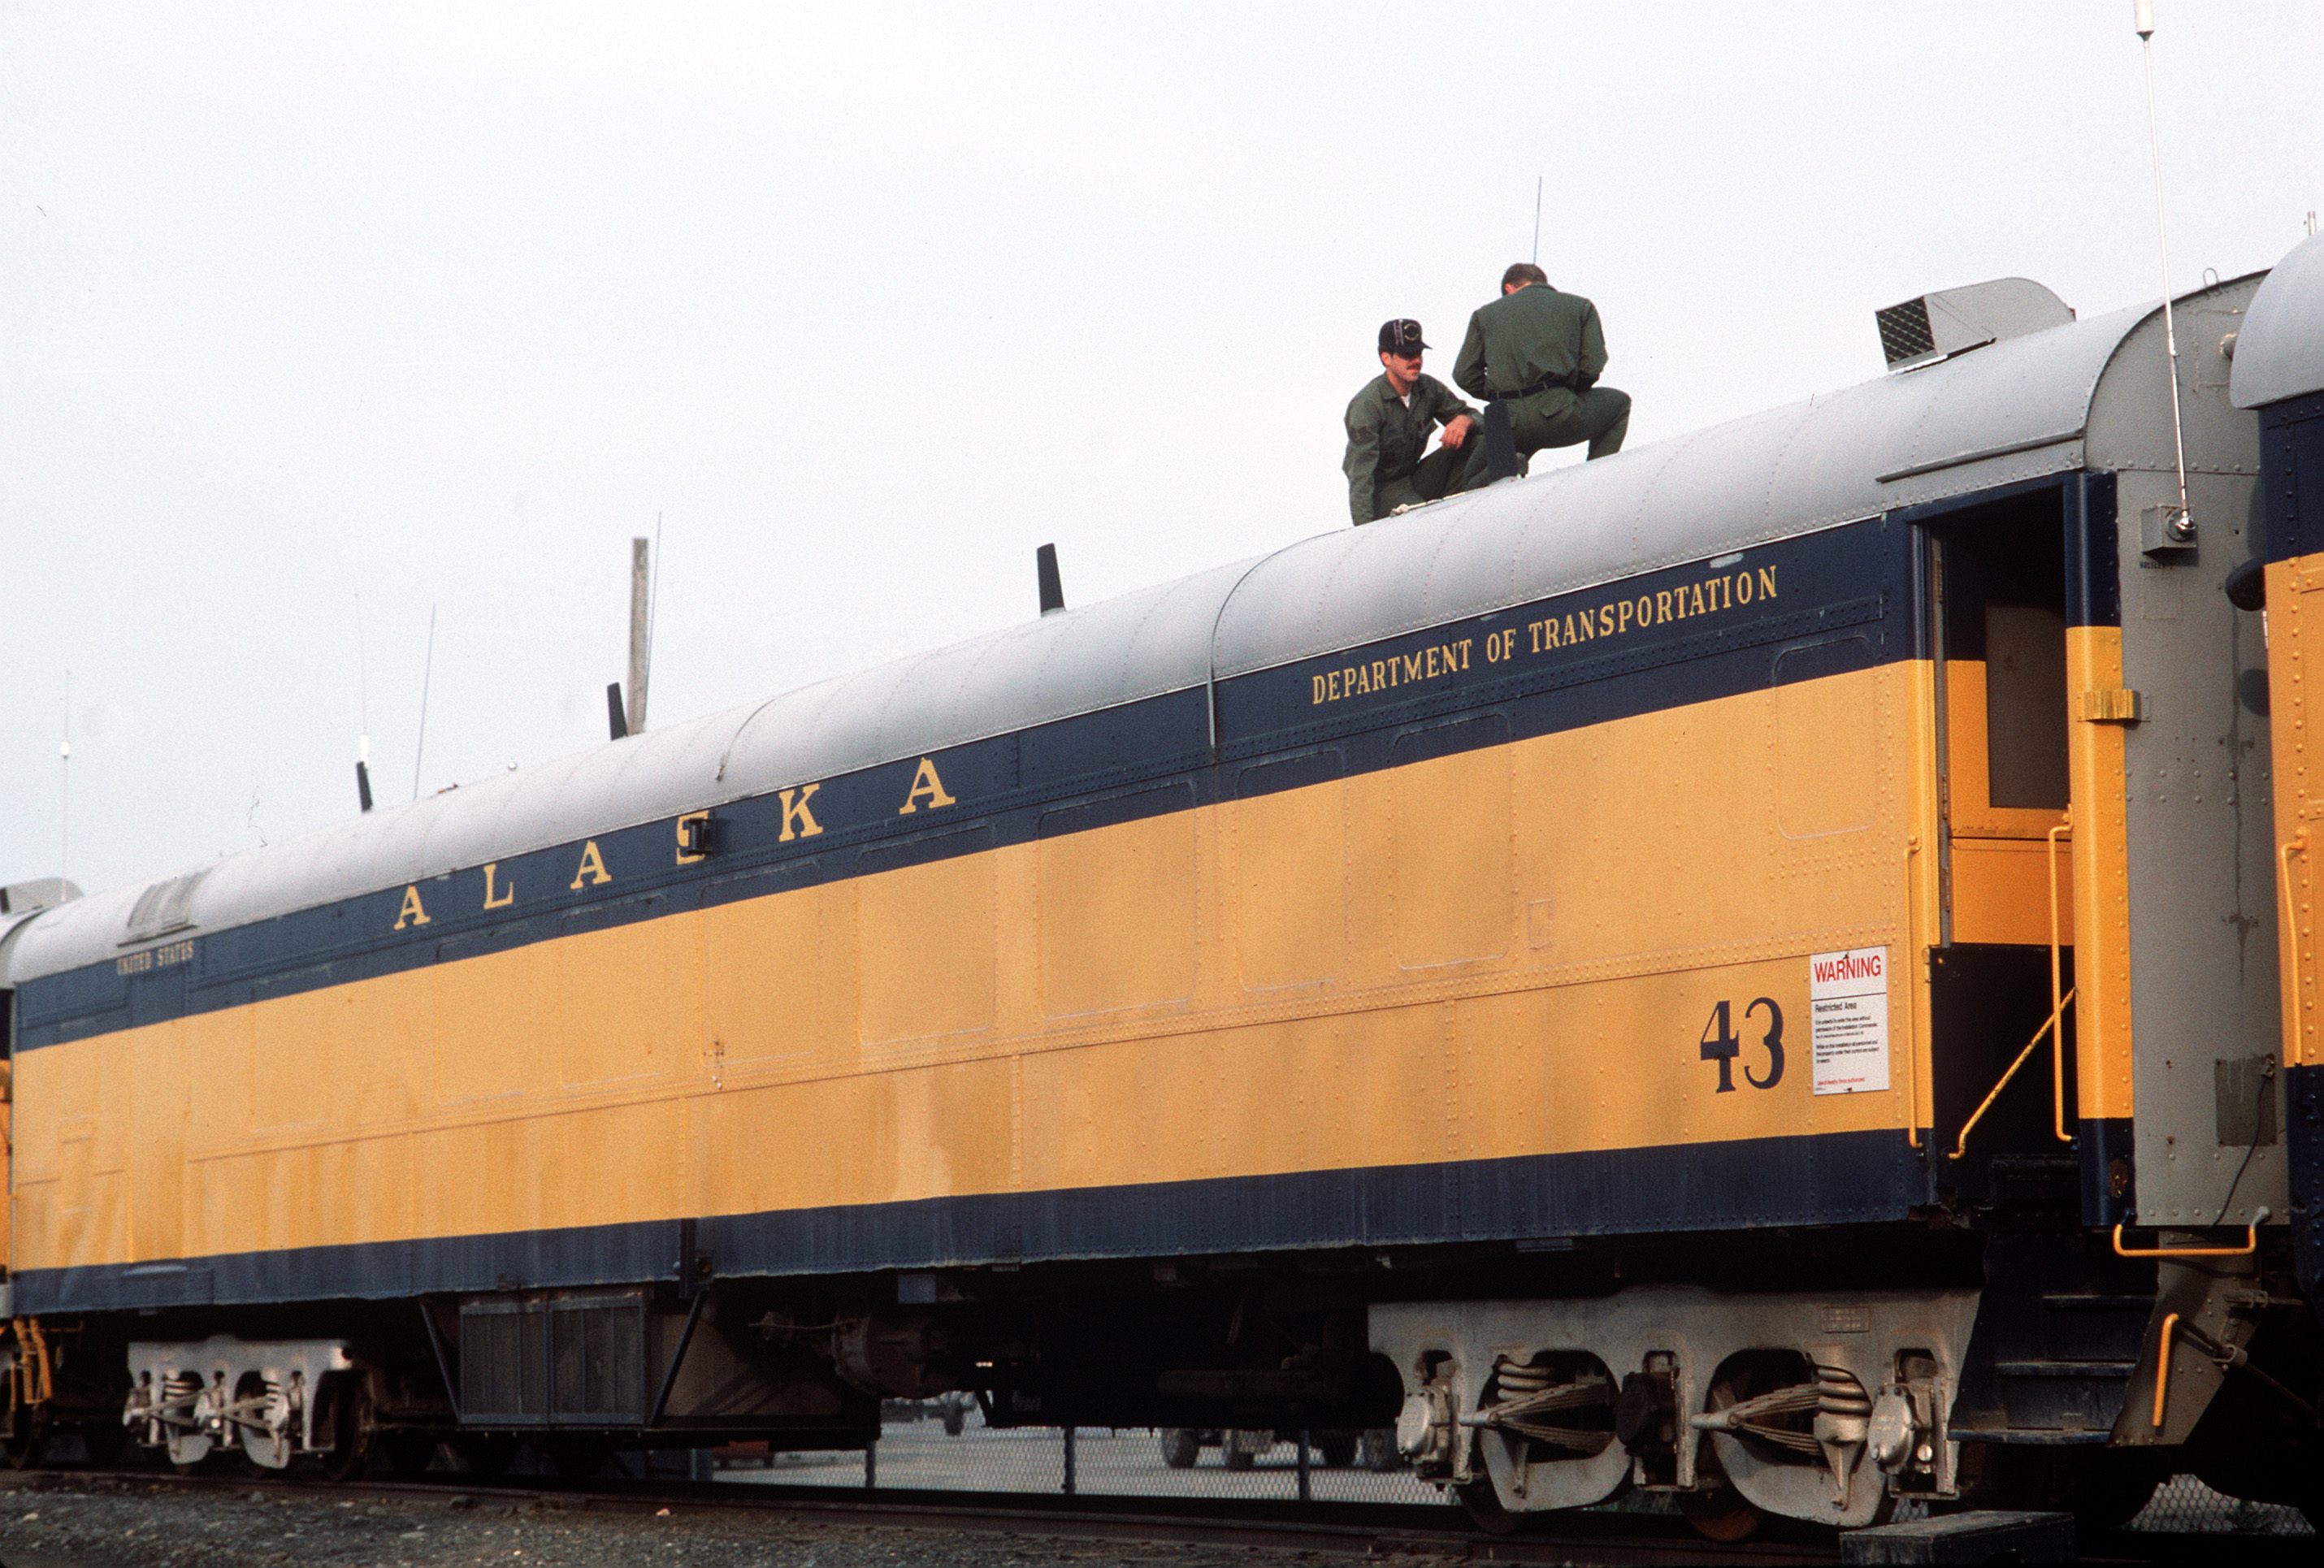 SSGT Bill Lovins, ground radio maintenance, left, and SSGT Randall Brinlee, teletype communications operator, install communications antennas on one of several converted railway cars which function as the Alaskan Air Command's Alternate Command Post.  Both men are assigned to the 1930th Information Systems Squadron.